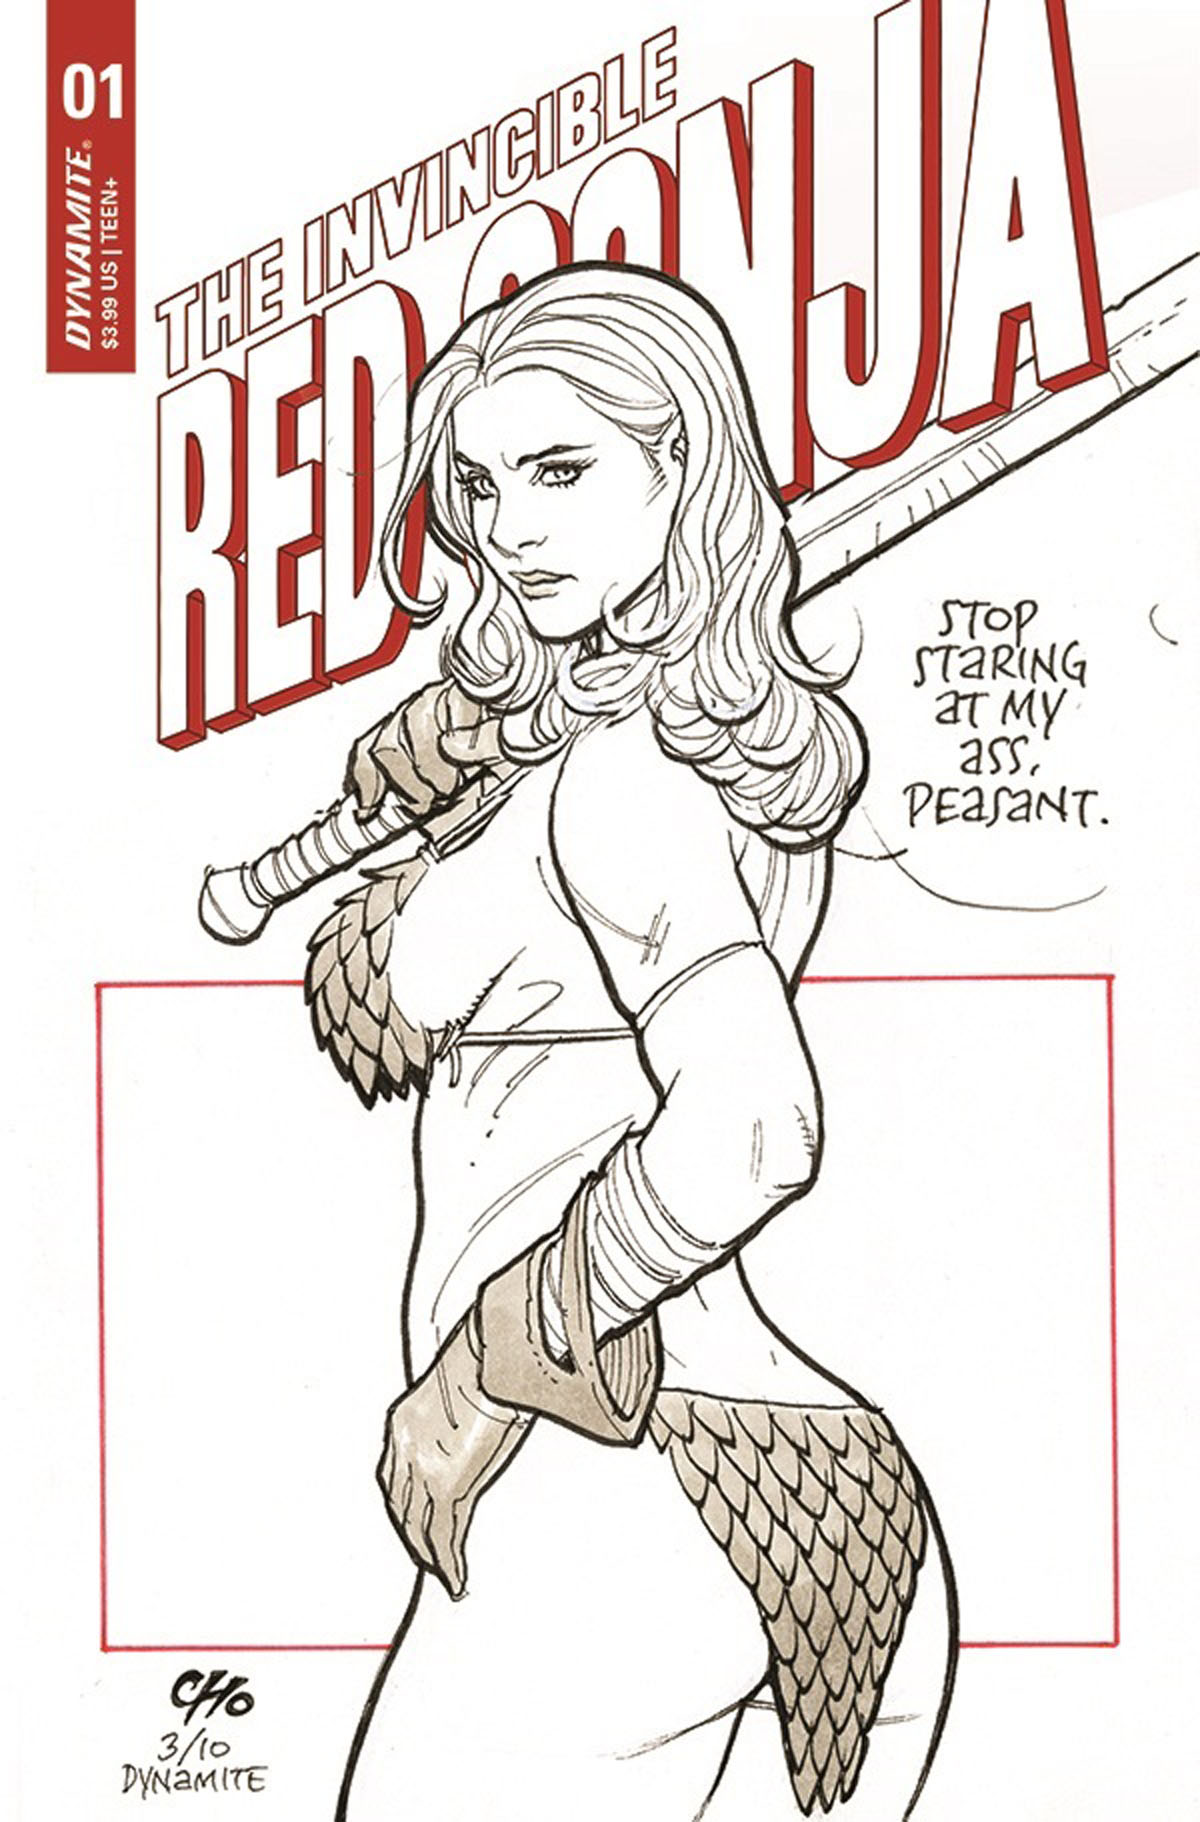 The Invincible Red Sonja #1 cover by Frank Cho